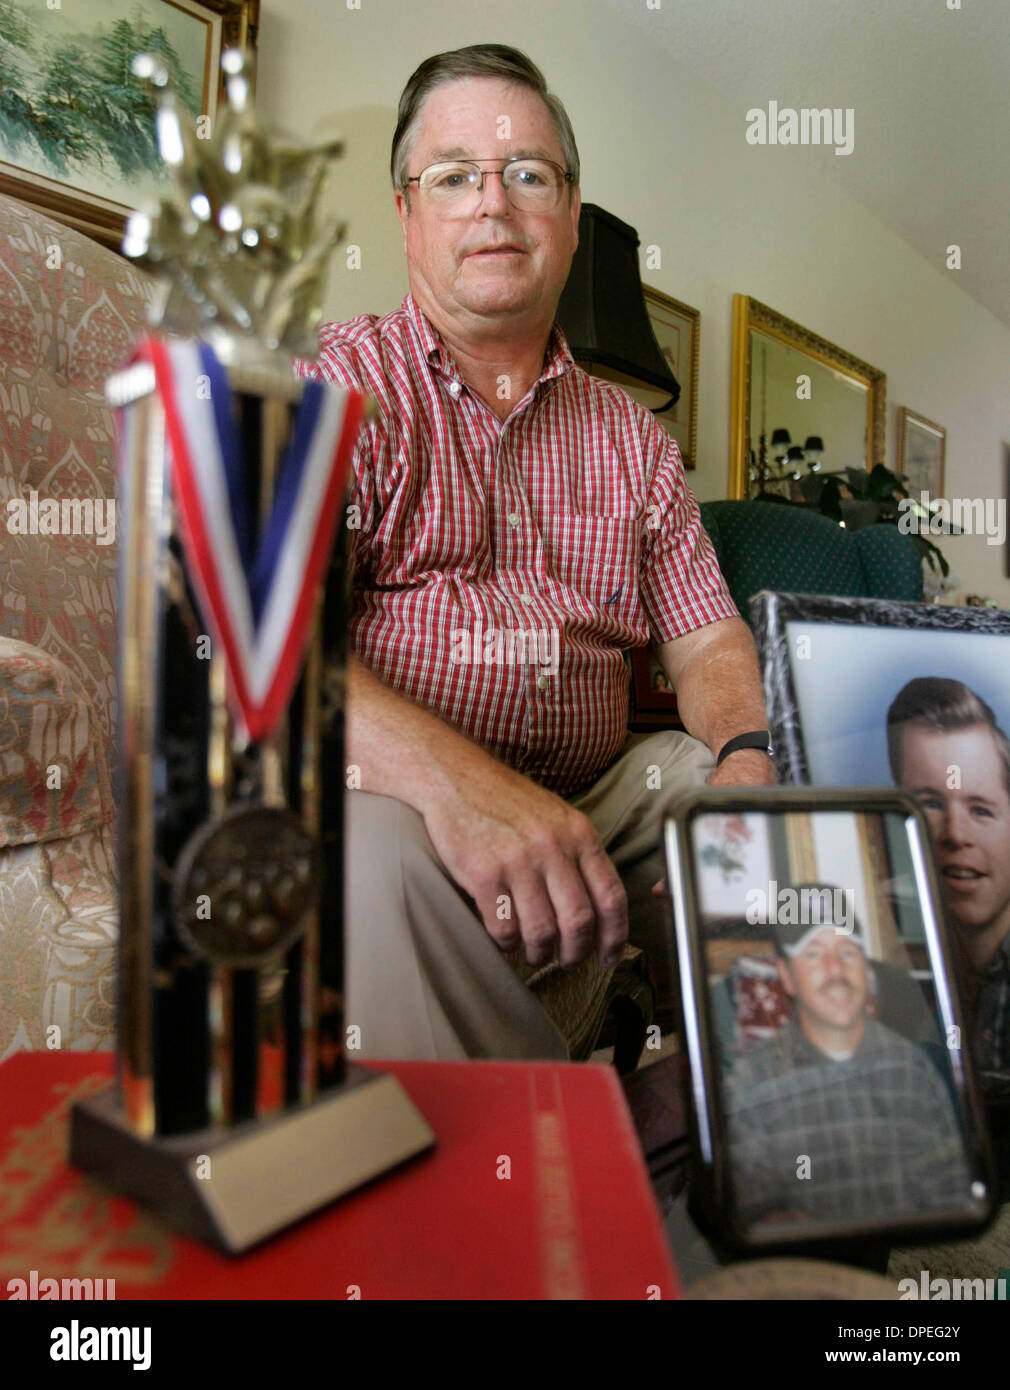 (Published 7/14/2006, NI-6) July 7, 2006, Rancho Penasquitos, California. BOB MEISSNER sat in his livingroom surrounded by photos of his son SCOTT. The trophy is from a special olympics event he won.SCOTT, was pronounced brain dead last year after a choking accident. Meissner, his daughter and his ex-wife (Scott's mother) made the decision to donate Scott's organs to help others wi Stock Photo